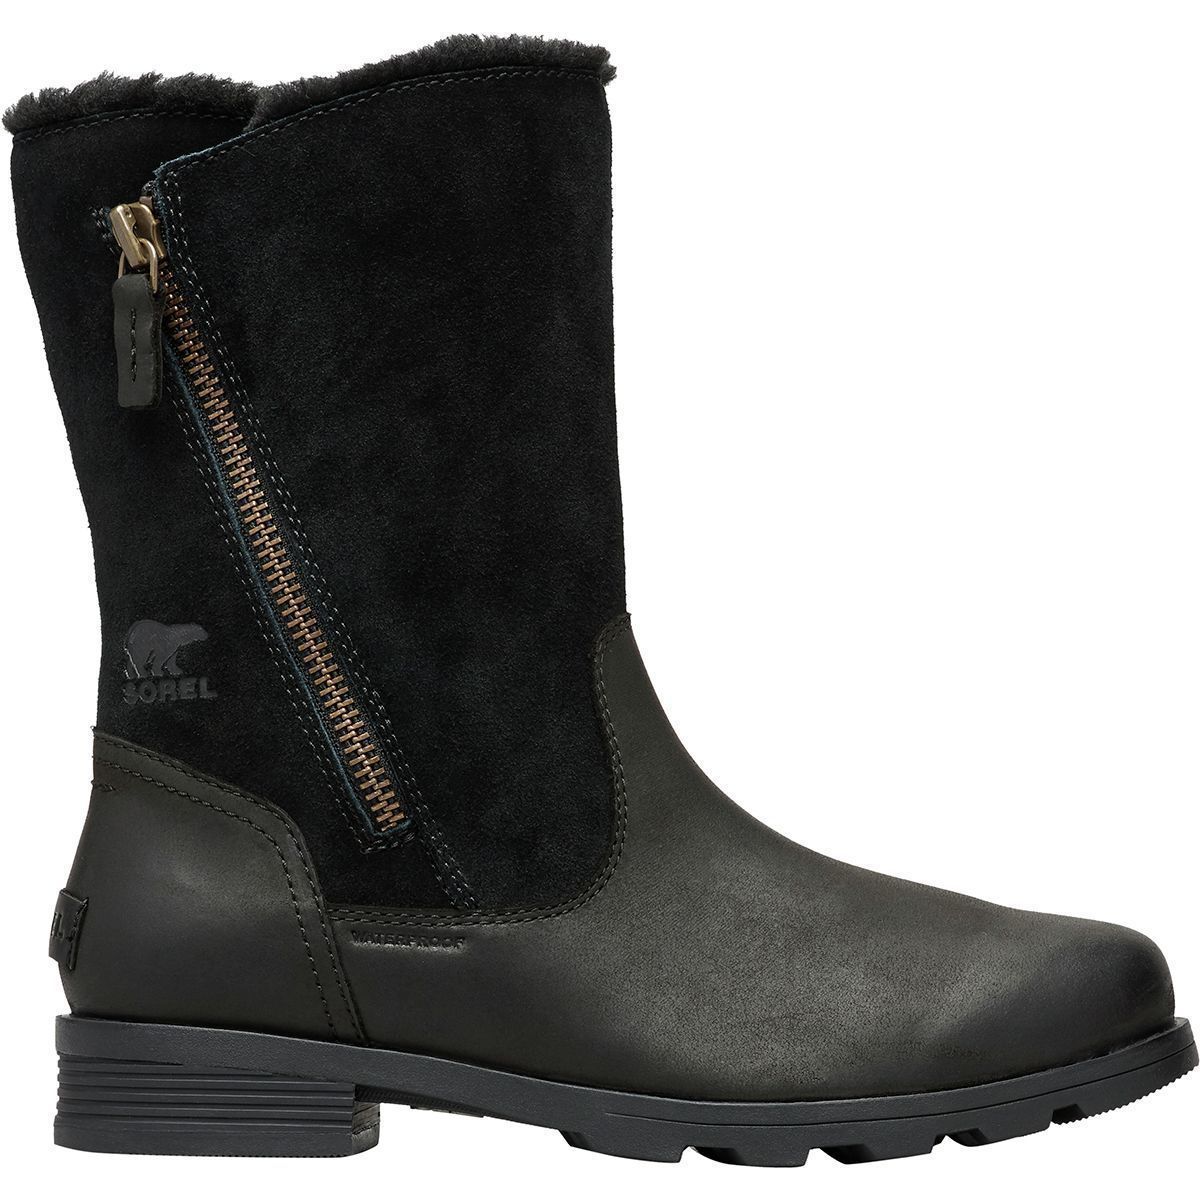 women's fold over winter boots